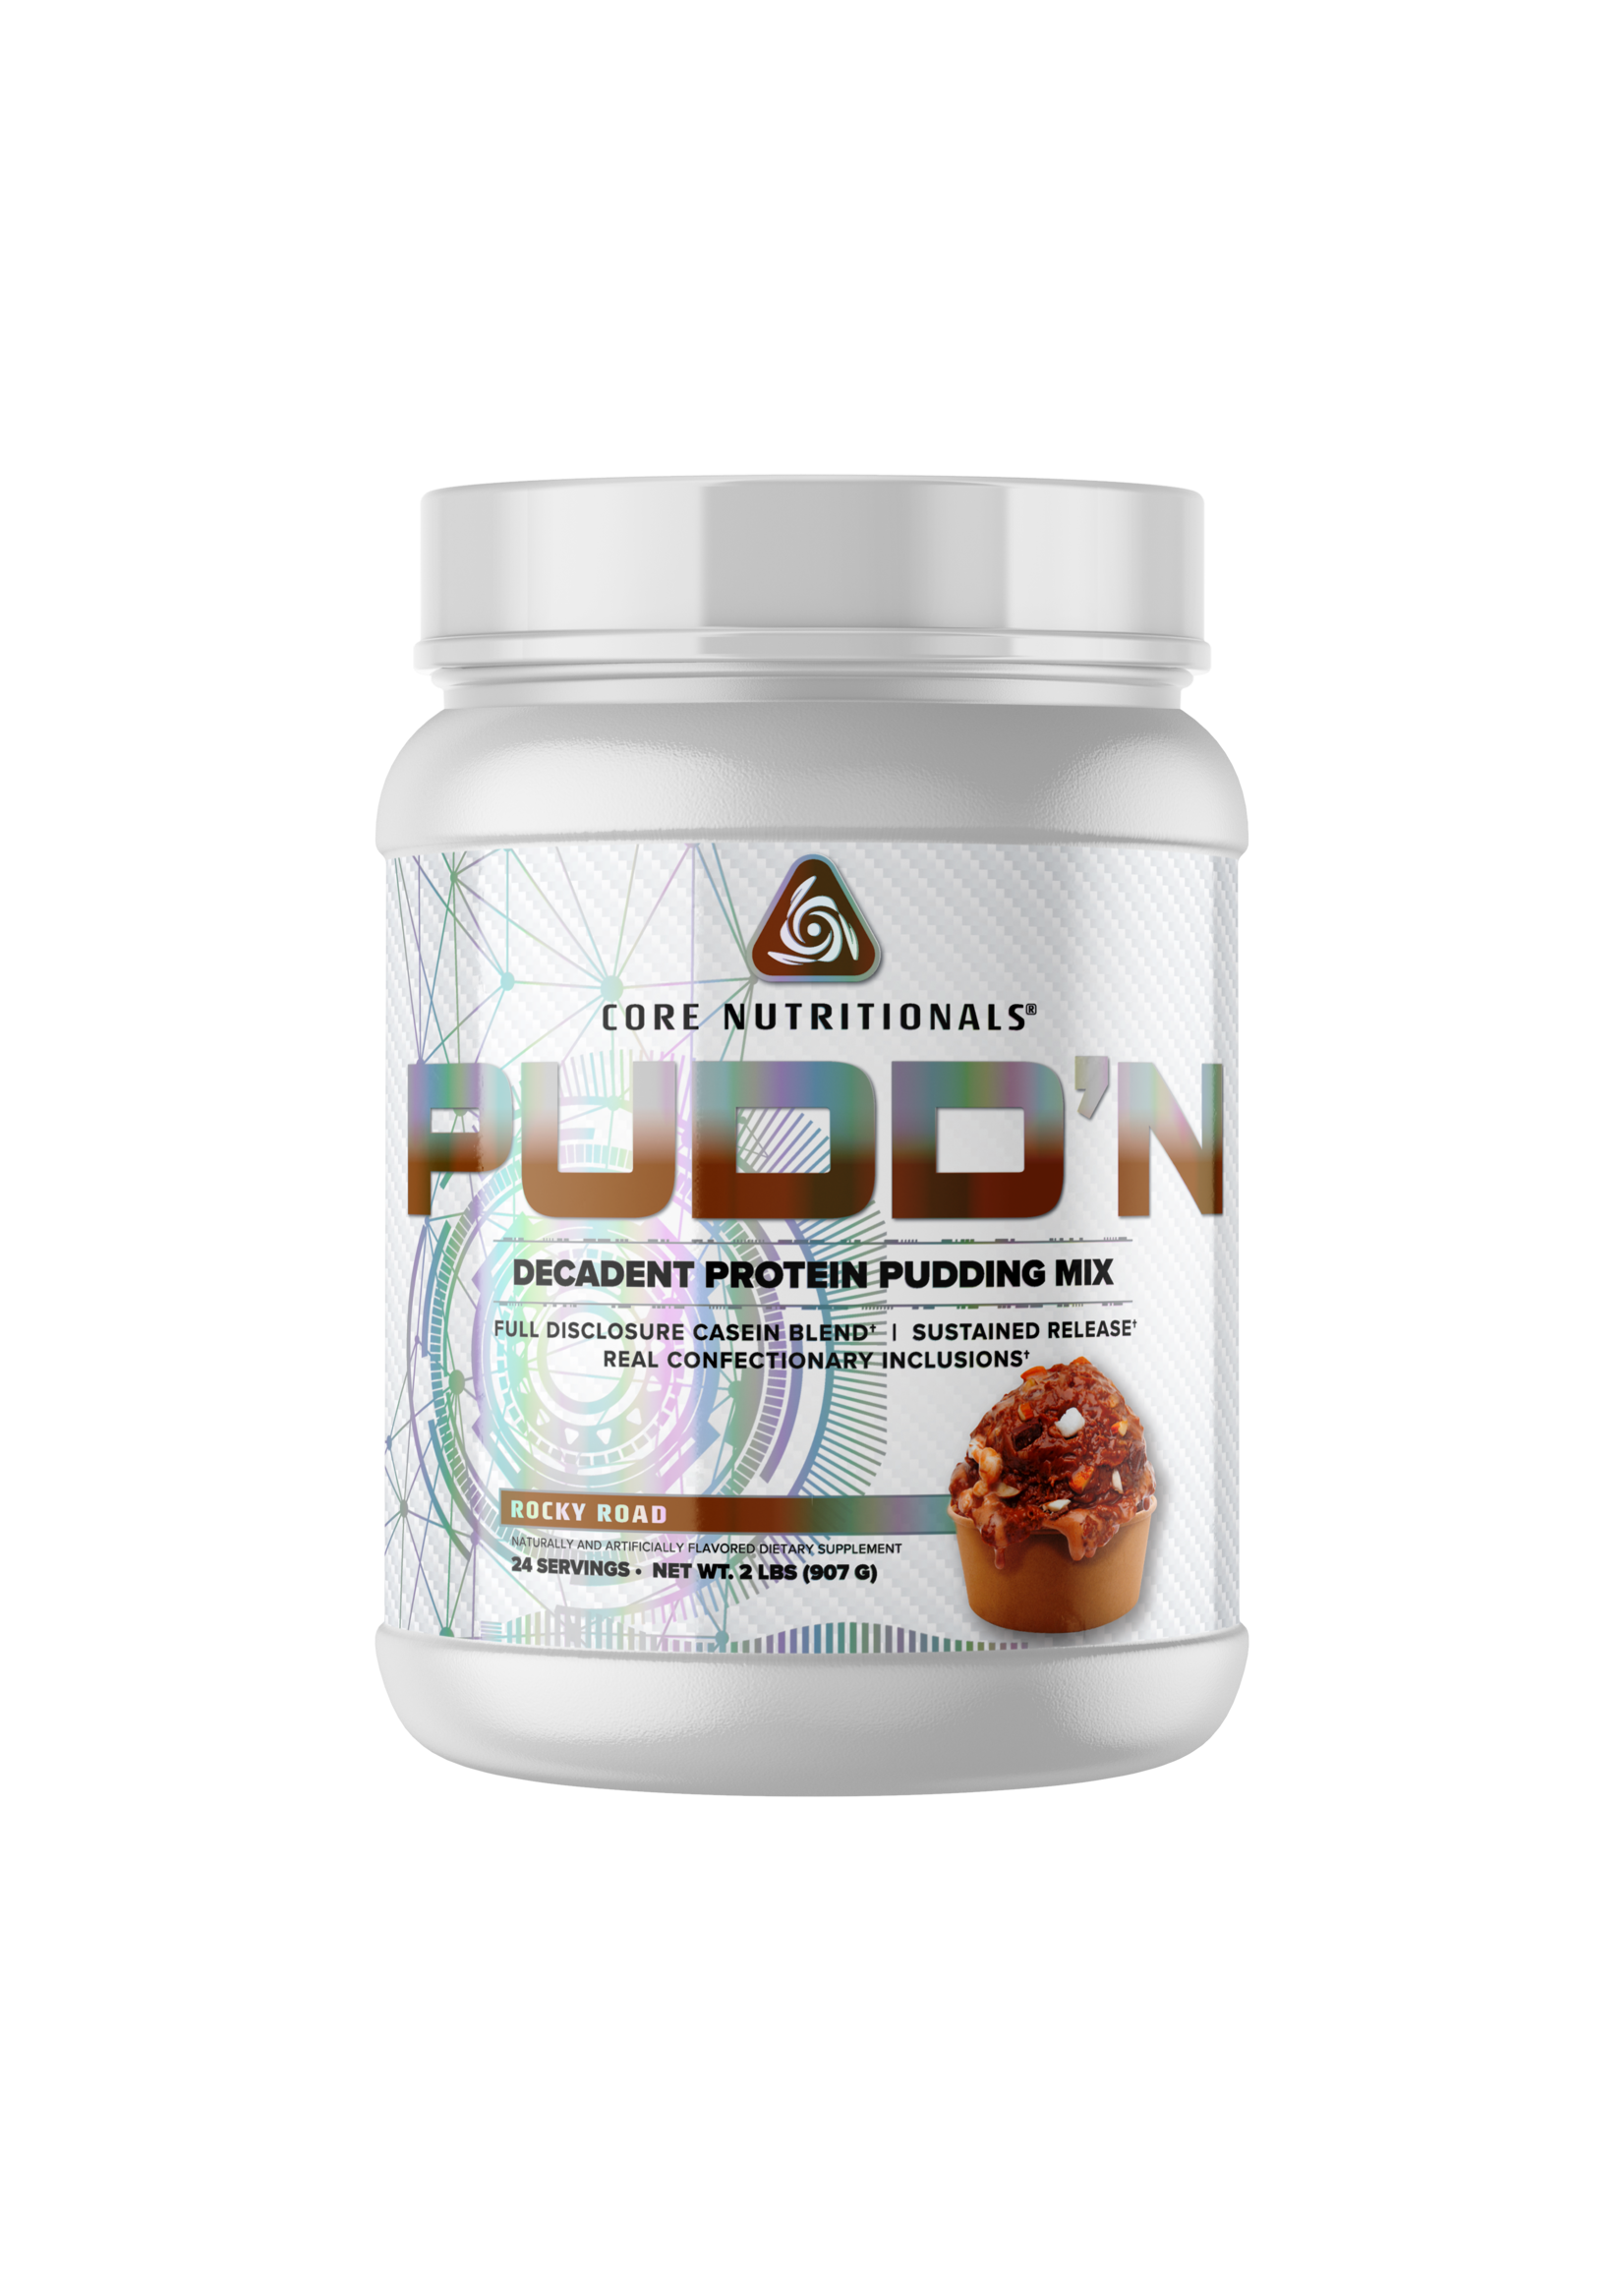 Core Nutritionals Core Pudd'n